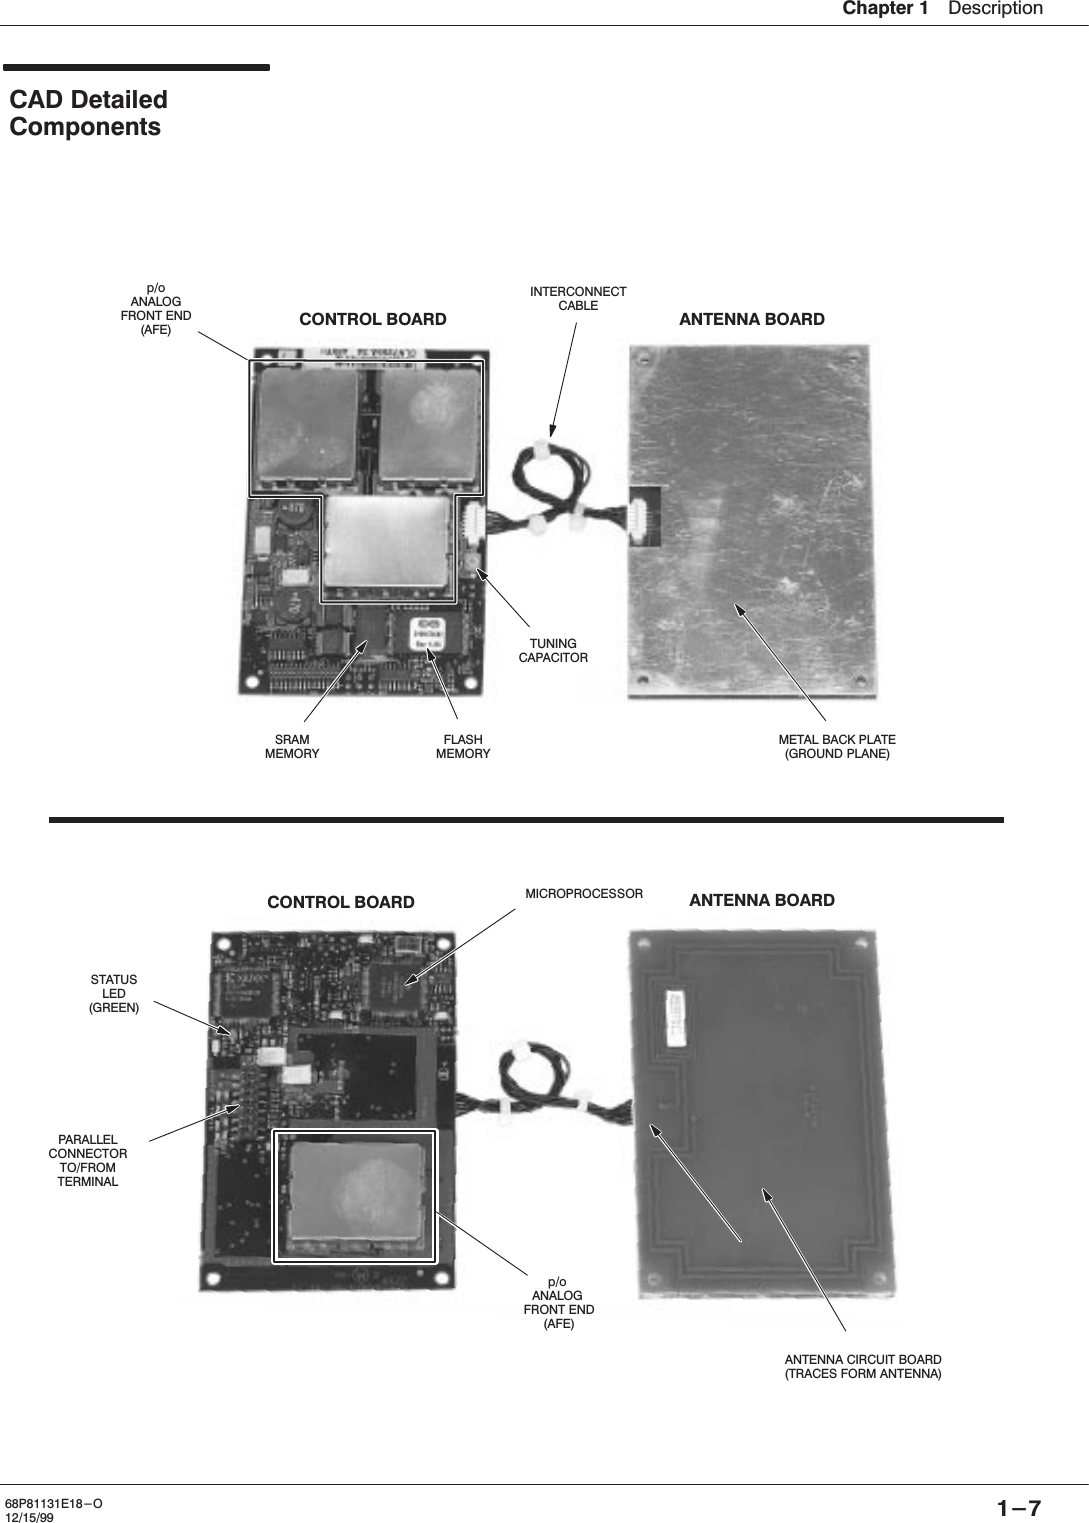 Chapter 1ąDescription1-768P81131E18-O12/15/99CAD DetailedComponentsSRAMMEMORYFLASHMEMORYCONTROL BOARD ANTENNA BOARDPARALLELCONNECTORTO/FROMTERMINALTUNINGCAPACITORMICROPROCESSORMETAL BACK PLATE(GROUND PLANE)CONTROL BOARD ANTENNA BOARDINTERCONNECTCABLEANTENNA CIRCUIT BOARD(TRACES FORM ANTENNA)STATUSLED(GREEN)p/oANALOGFRONT END(AFE)p/oANALOGFRONT END(AFE)